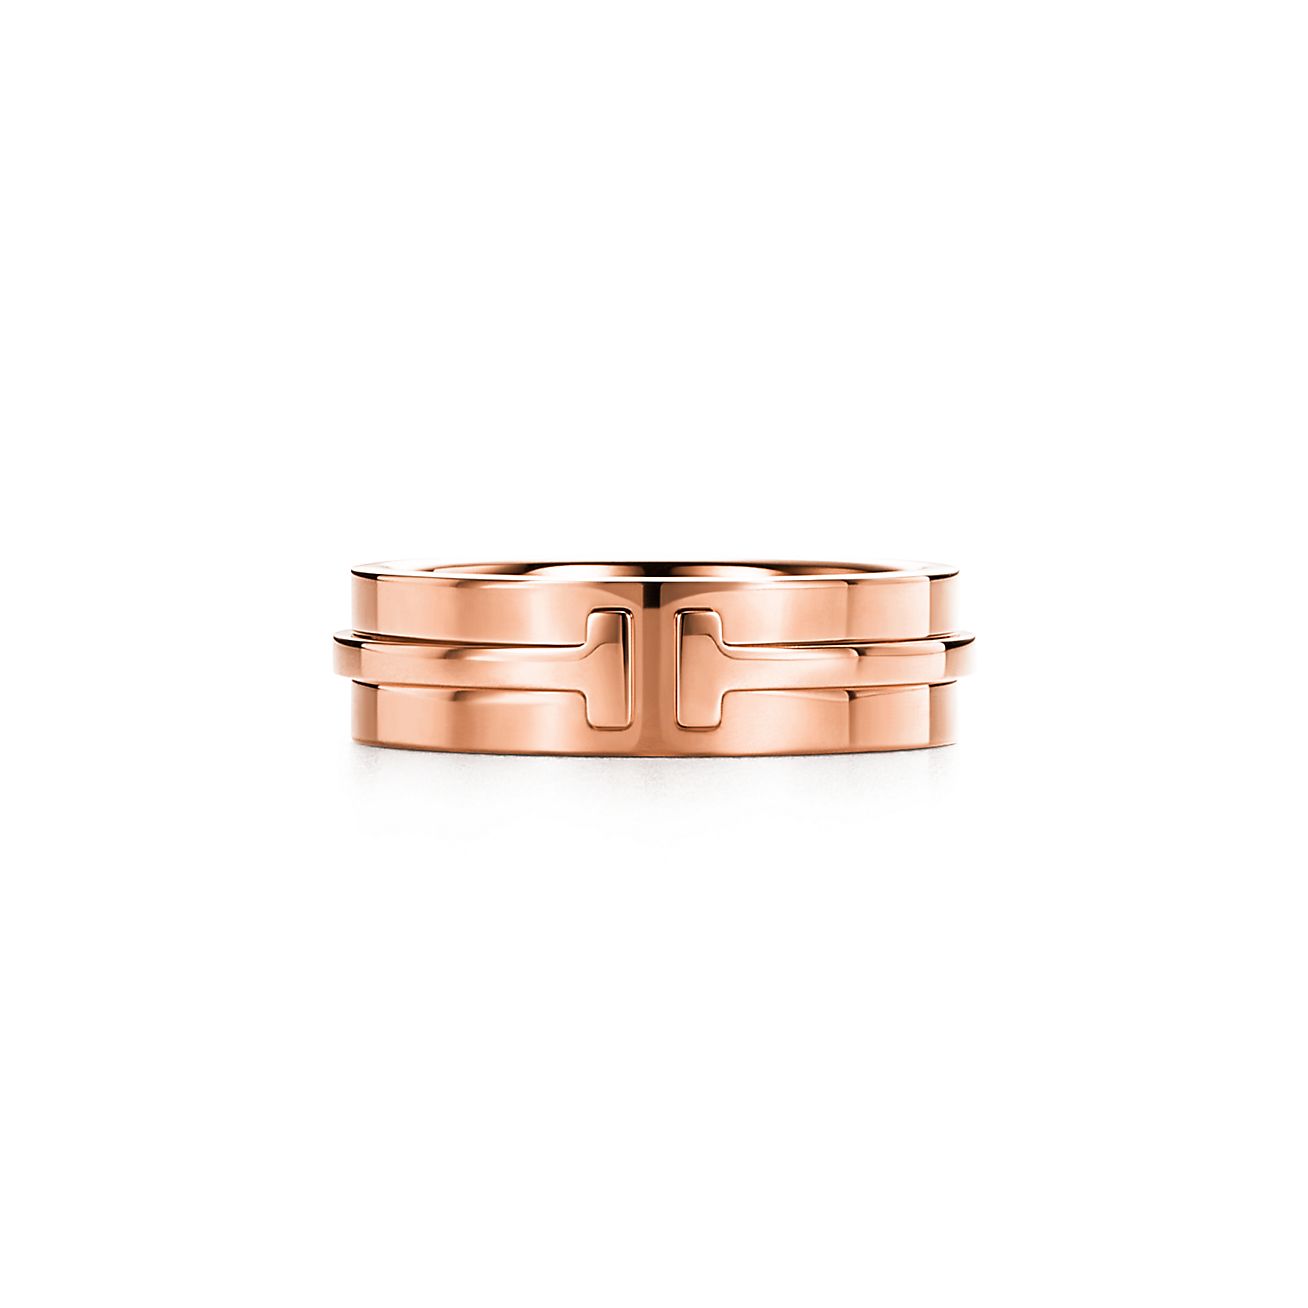 tiffany two t ring